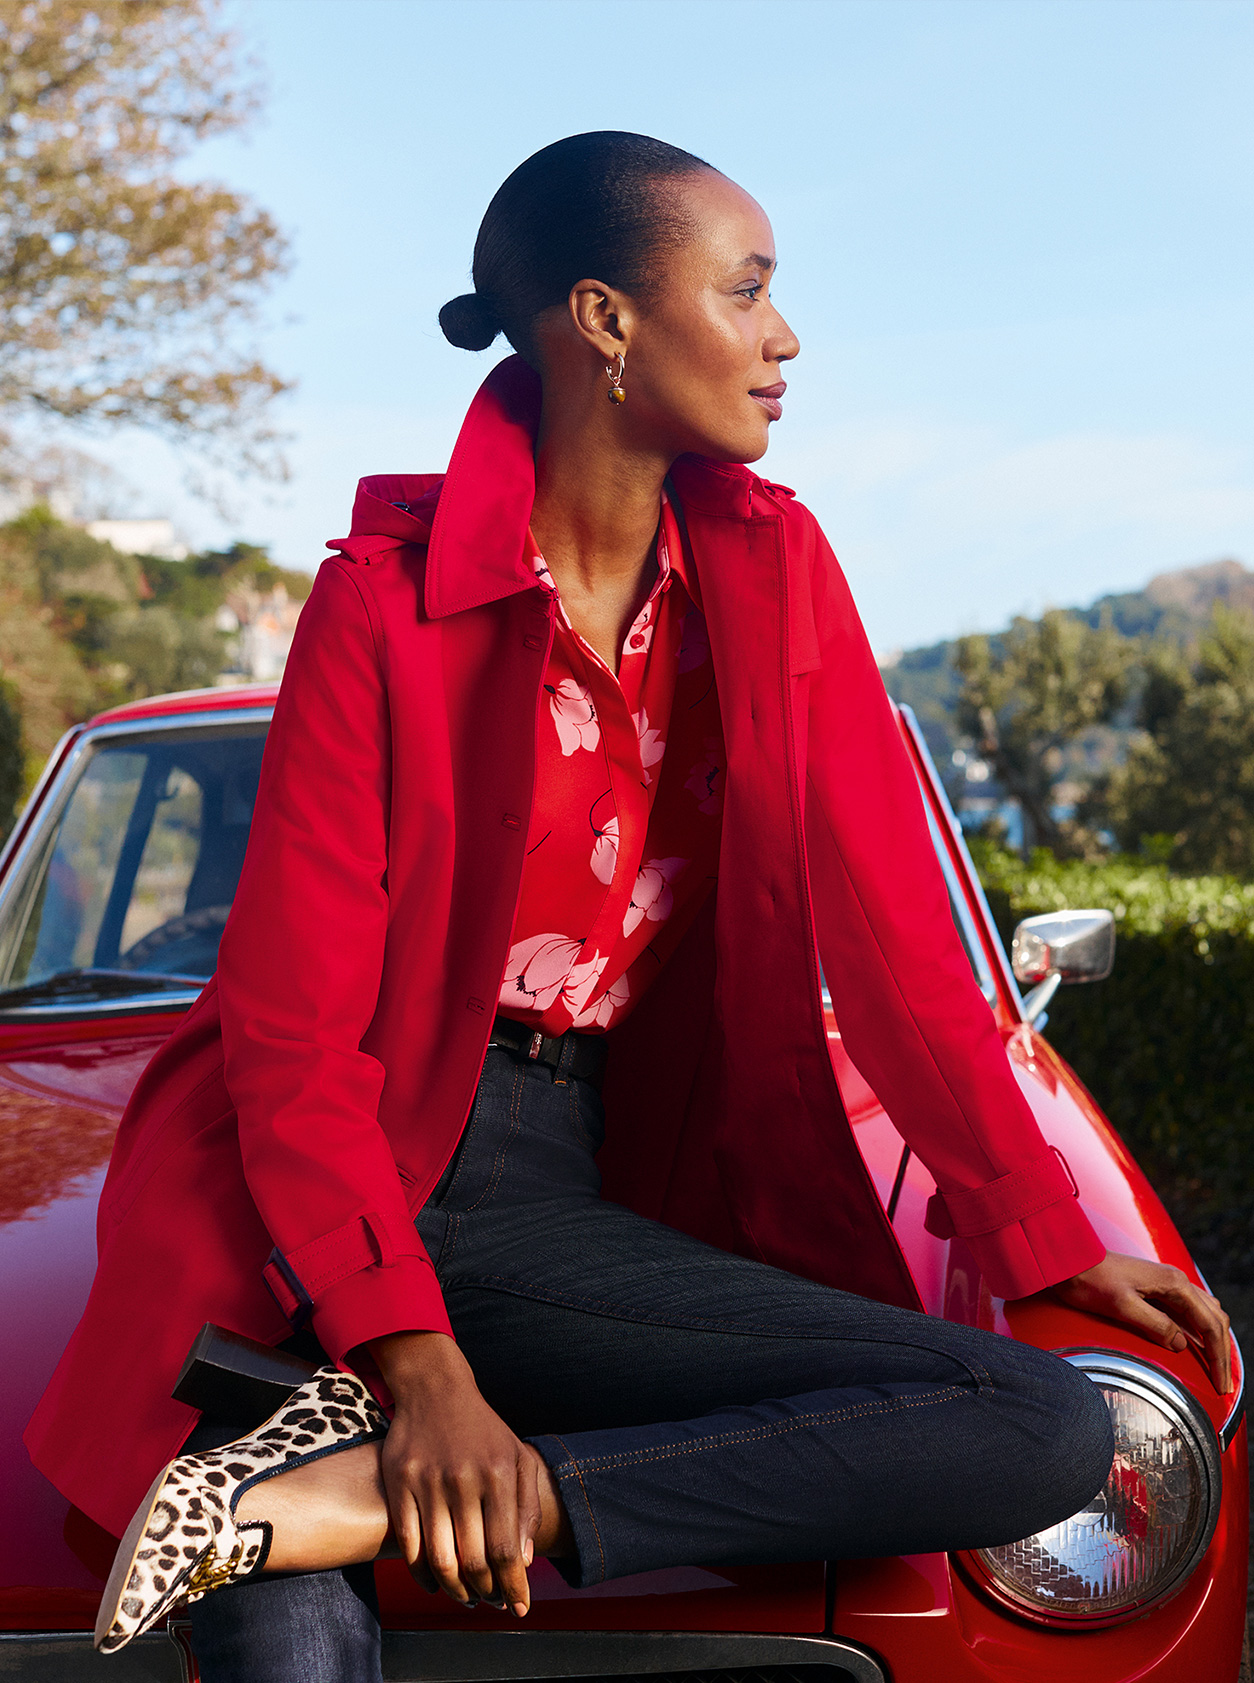 Model photographed sitting on the bonnet of a red car looking off to the right, wearing a Hobbs red trench coat, floral blouse and dark wash blue jeans.